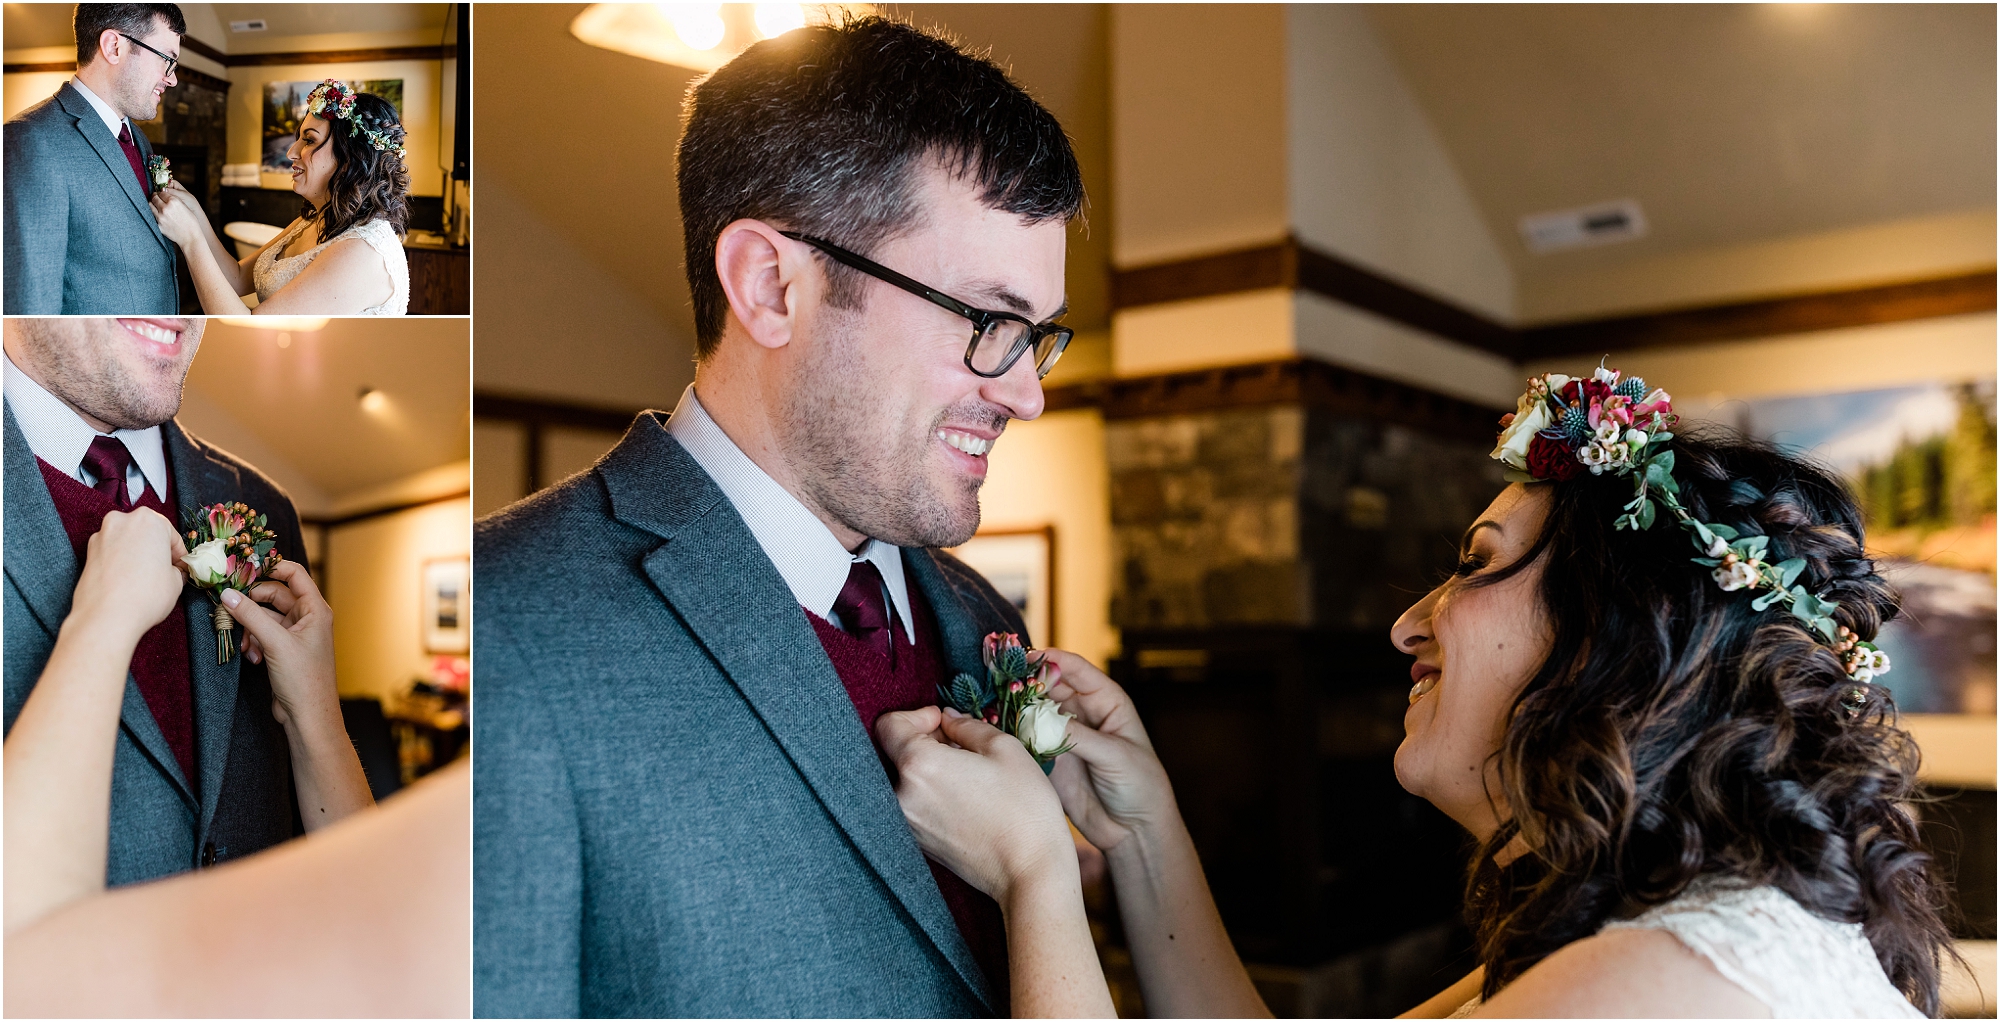 A bride pins a boutonniere on her groom in the room of their cabin at Five Pine Lodge before their Central Oregon winter elopement. | Erica Swantek Photography 